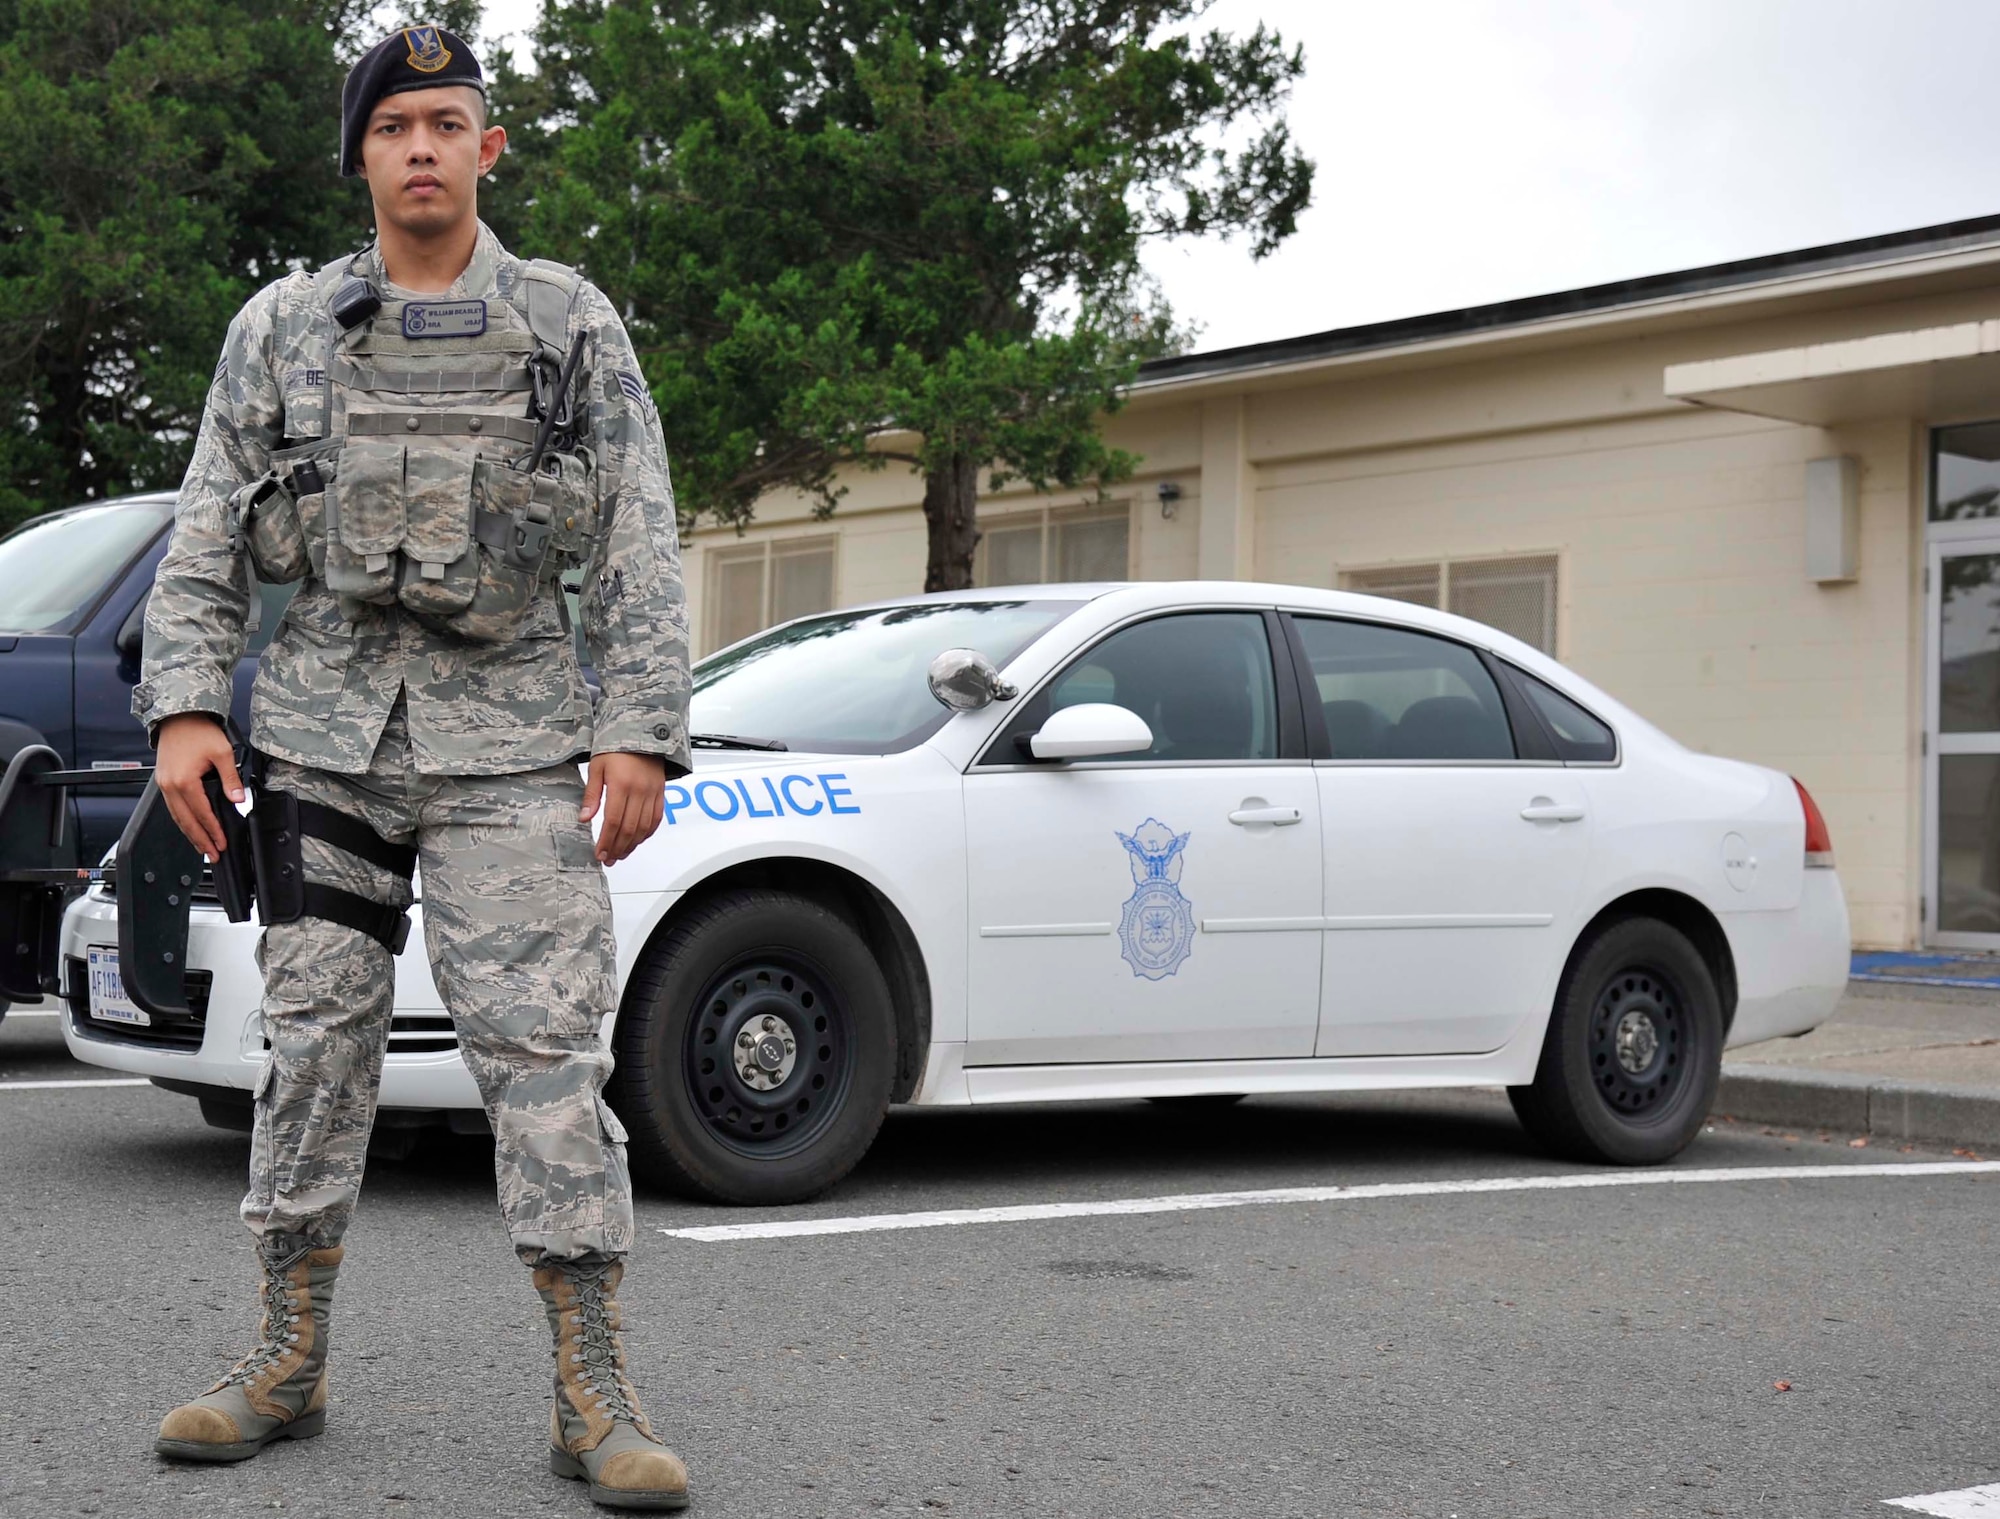 U.S. Air Force Senior Airman William Beasley, 35th Security Forces Squadron base defense operations controller, stands in front of a patrol car at Misawa Air Base, Japan, Sept. 2, 2014. As a security forces patrol officer, Beasley’s responsibilities include responding to accident scenes, dispatching units to an incident and ensuring overall base security. (U.S. Air Force photo by Airman 1st Class Patrick S. Ciccarone/Released)